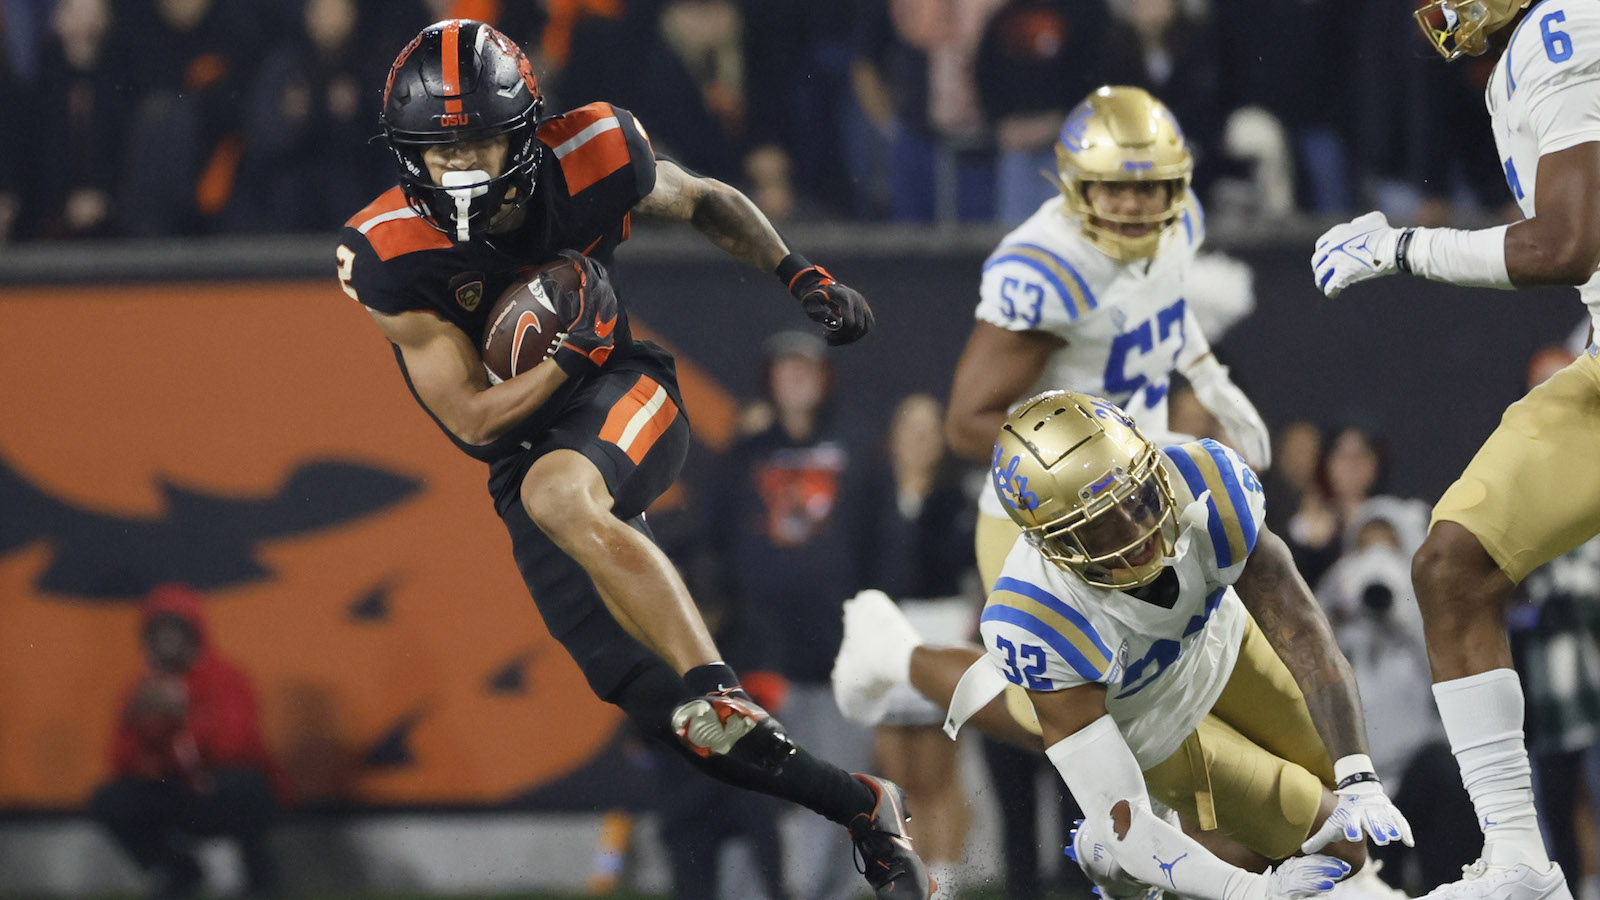 Oregon State wide receiver Anthony Gould outraces the UCLA defense